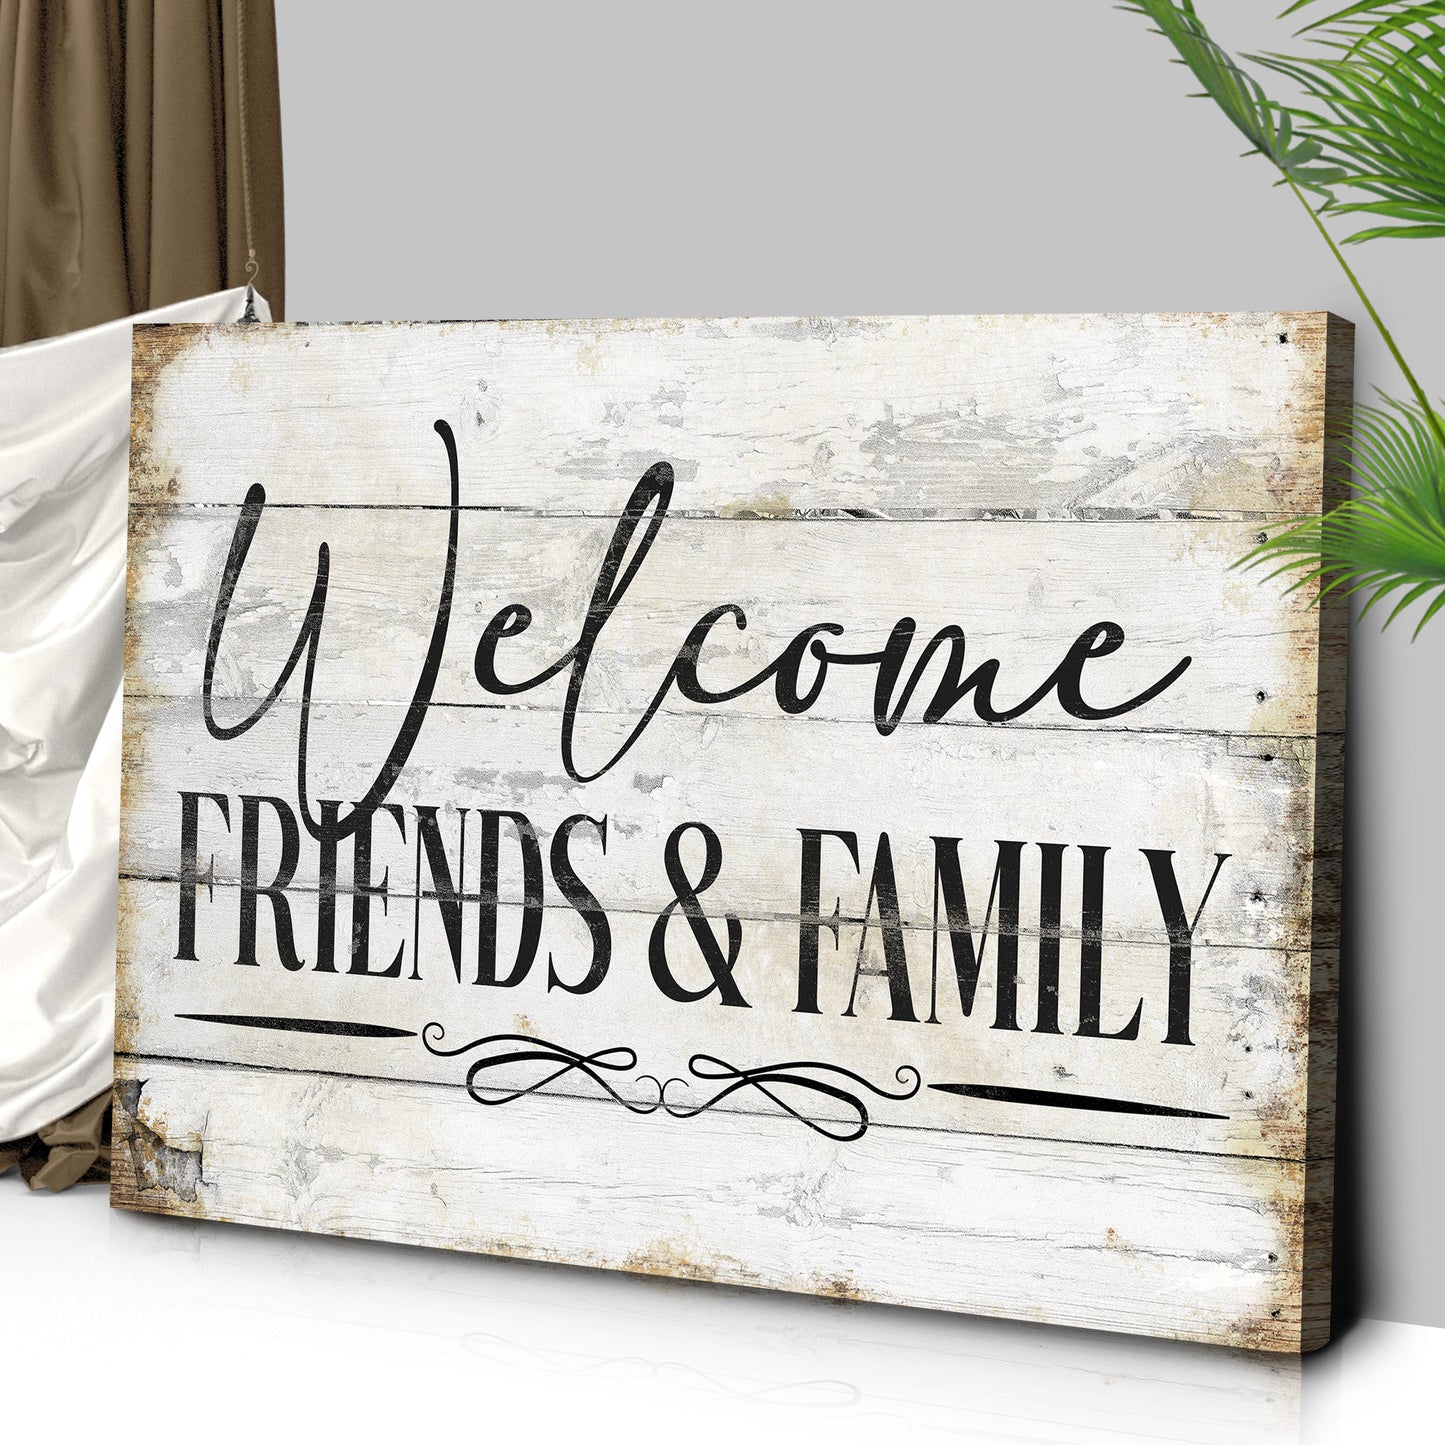 Welcome Friends & Family Sign Style 2 - Image by Tailored Canvases